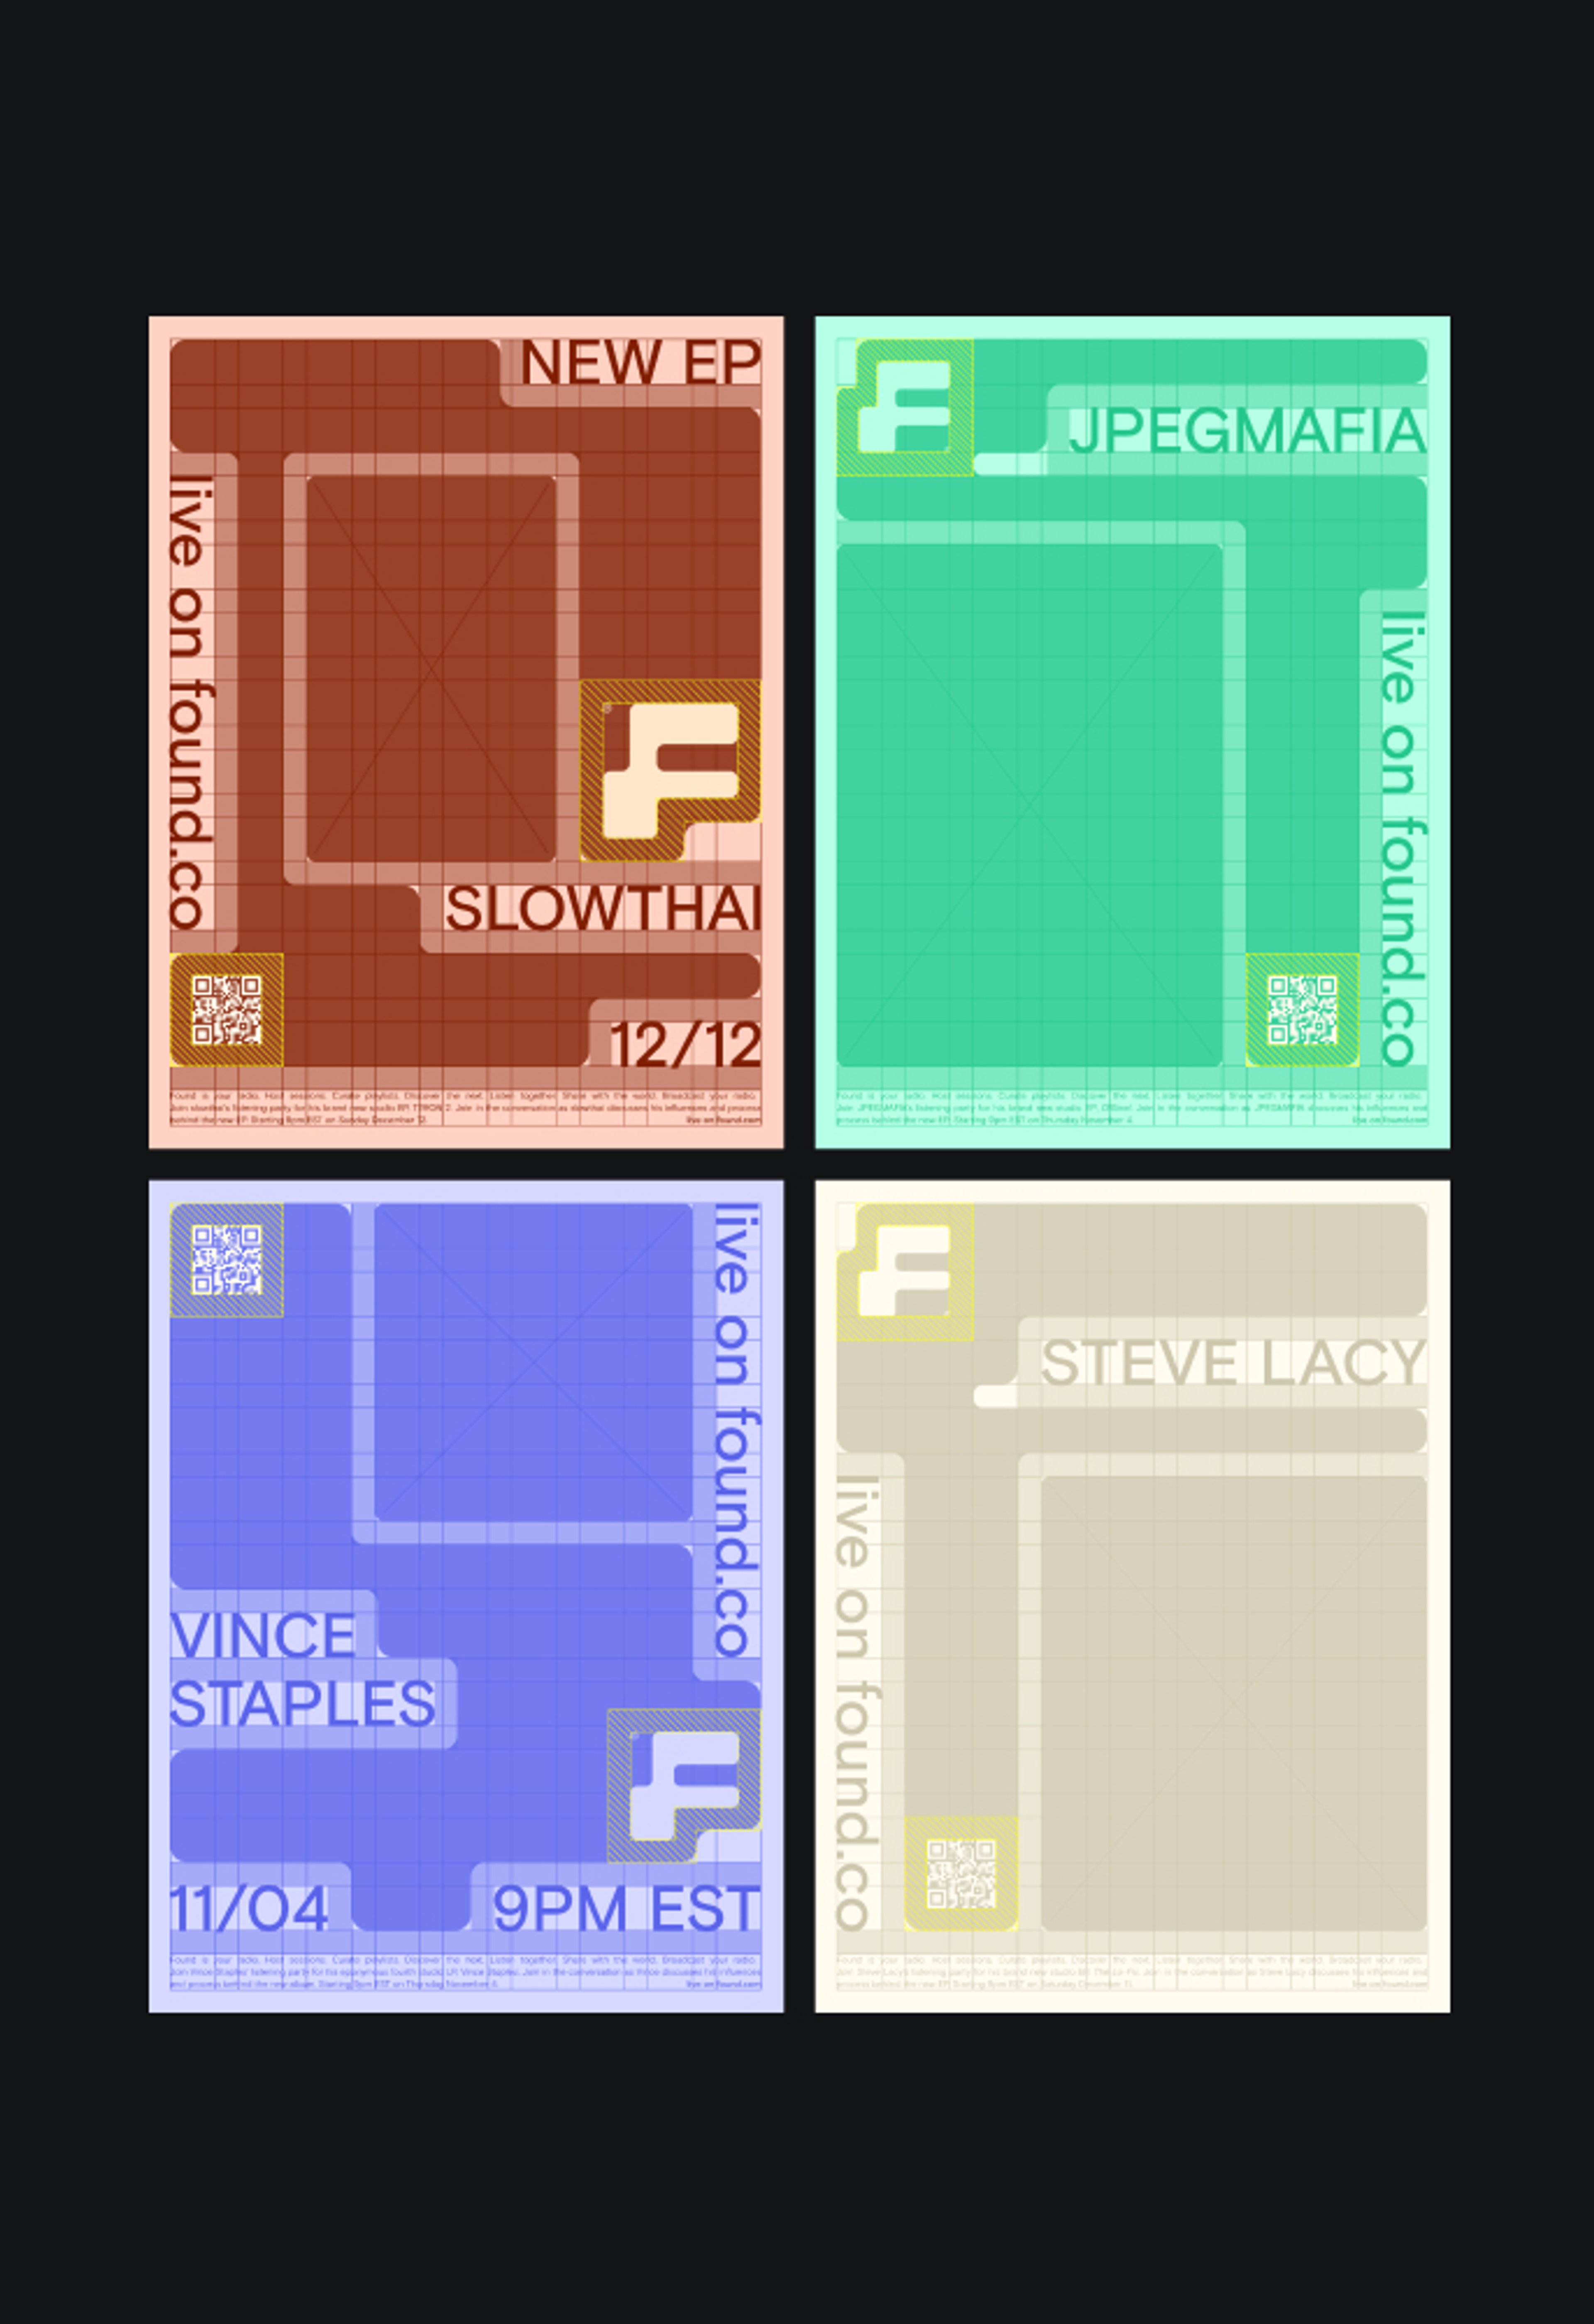 Image of how the Found posters are constructed showing the layout and grid